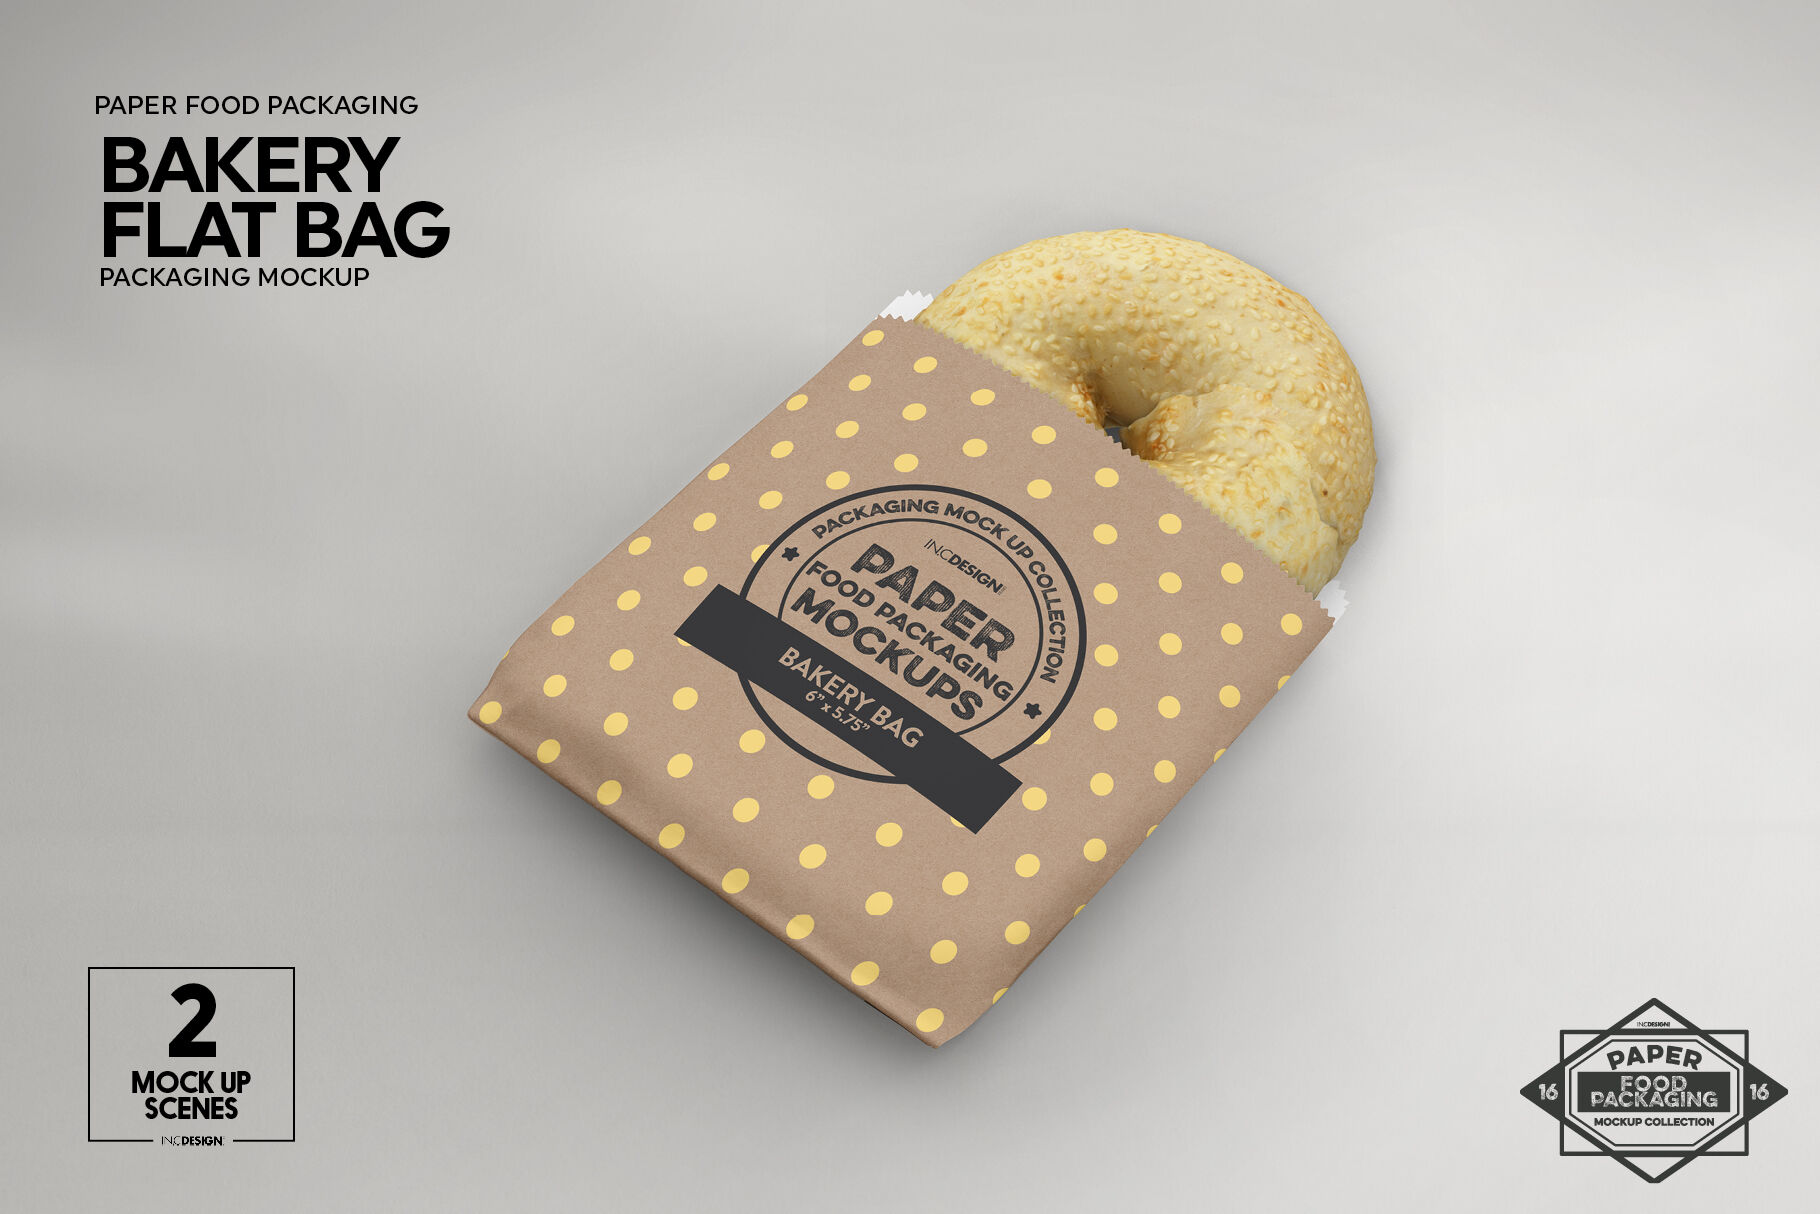 Download Flat Bakery Bags Packaging Mockup By Inc Design Studio Thehungryjpeg Com